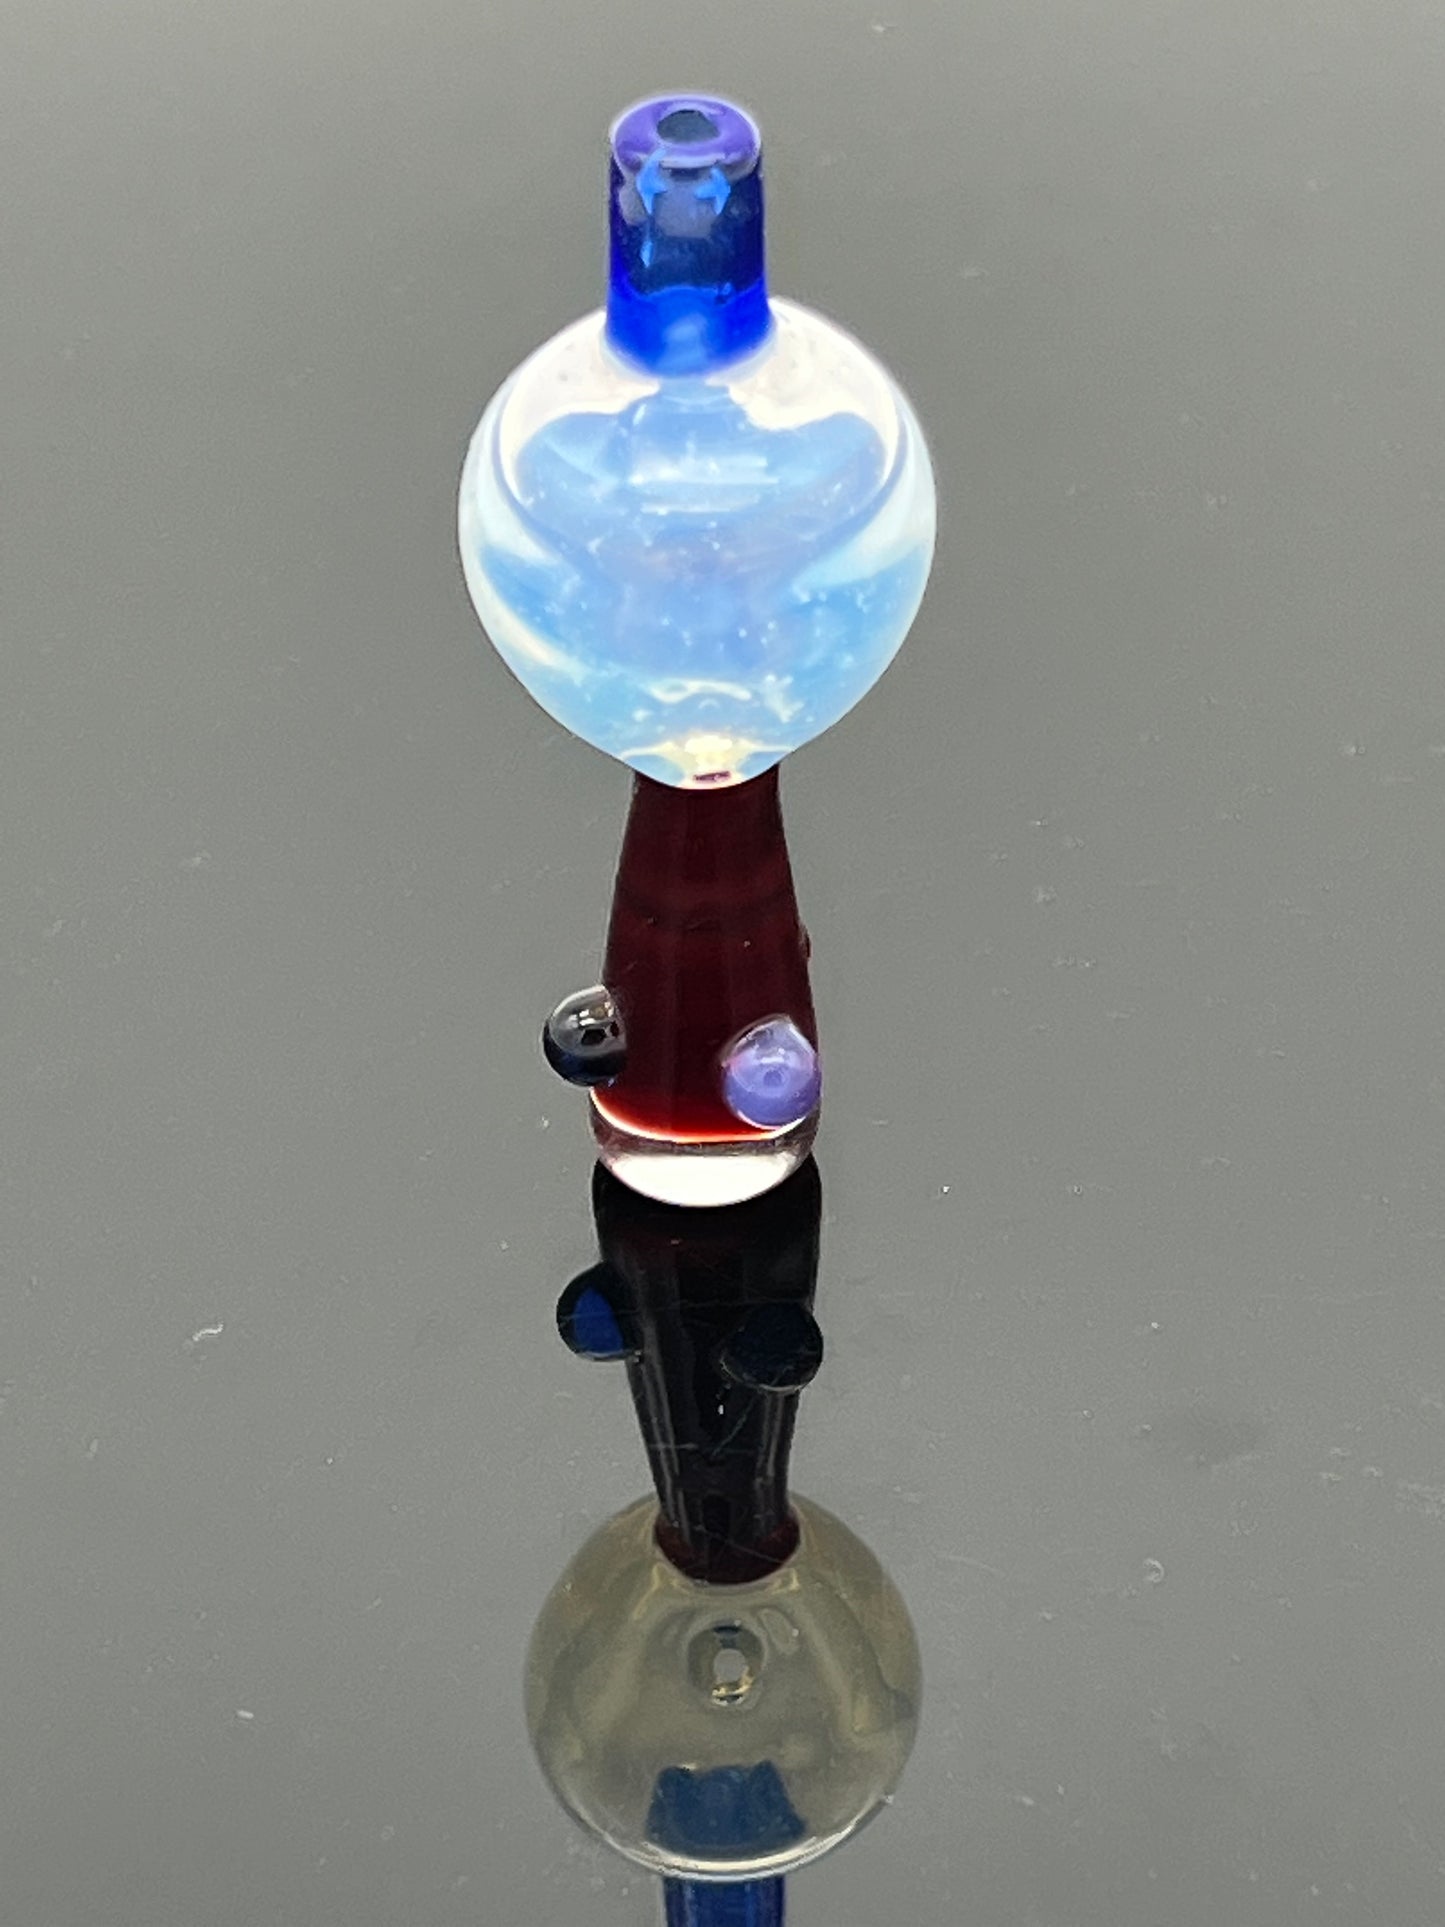 USA. Red, White and Blue themed Bubble Cap